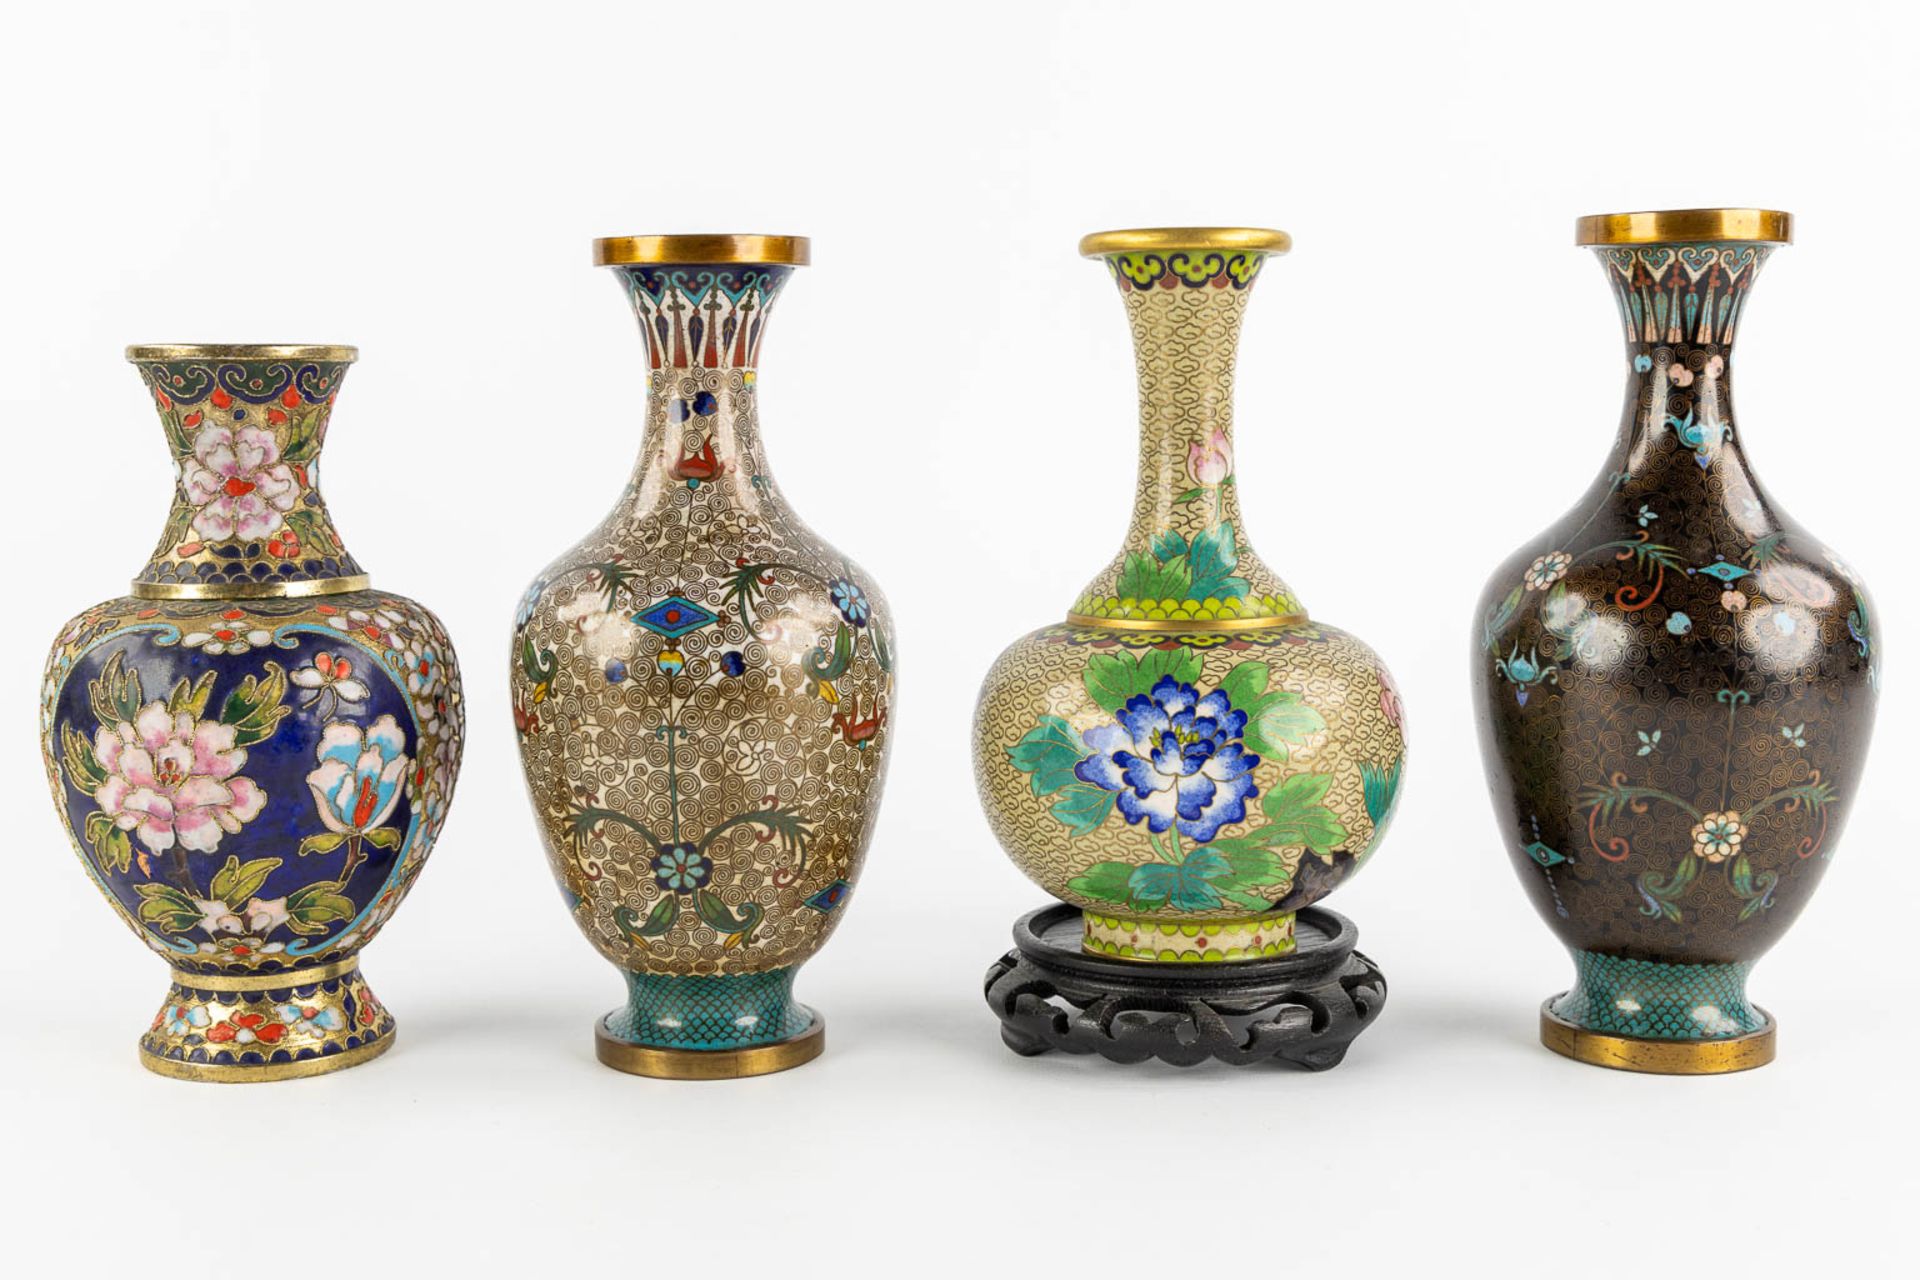 Twelve pieces of Cloisonné enamelled vases and trinklet bowls. Three pairs. (H:23 cm) - Image 6 of 14